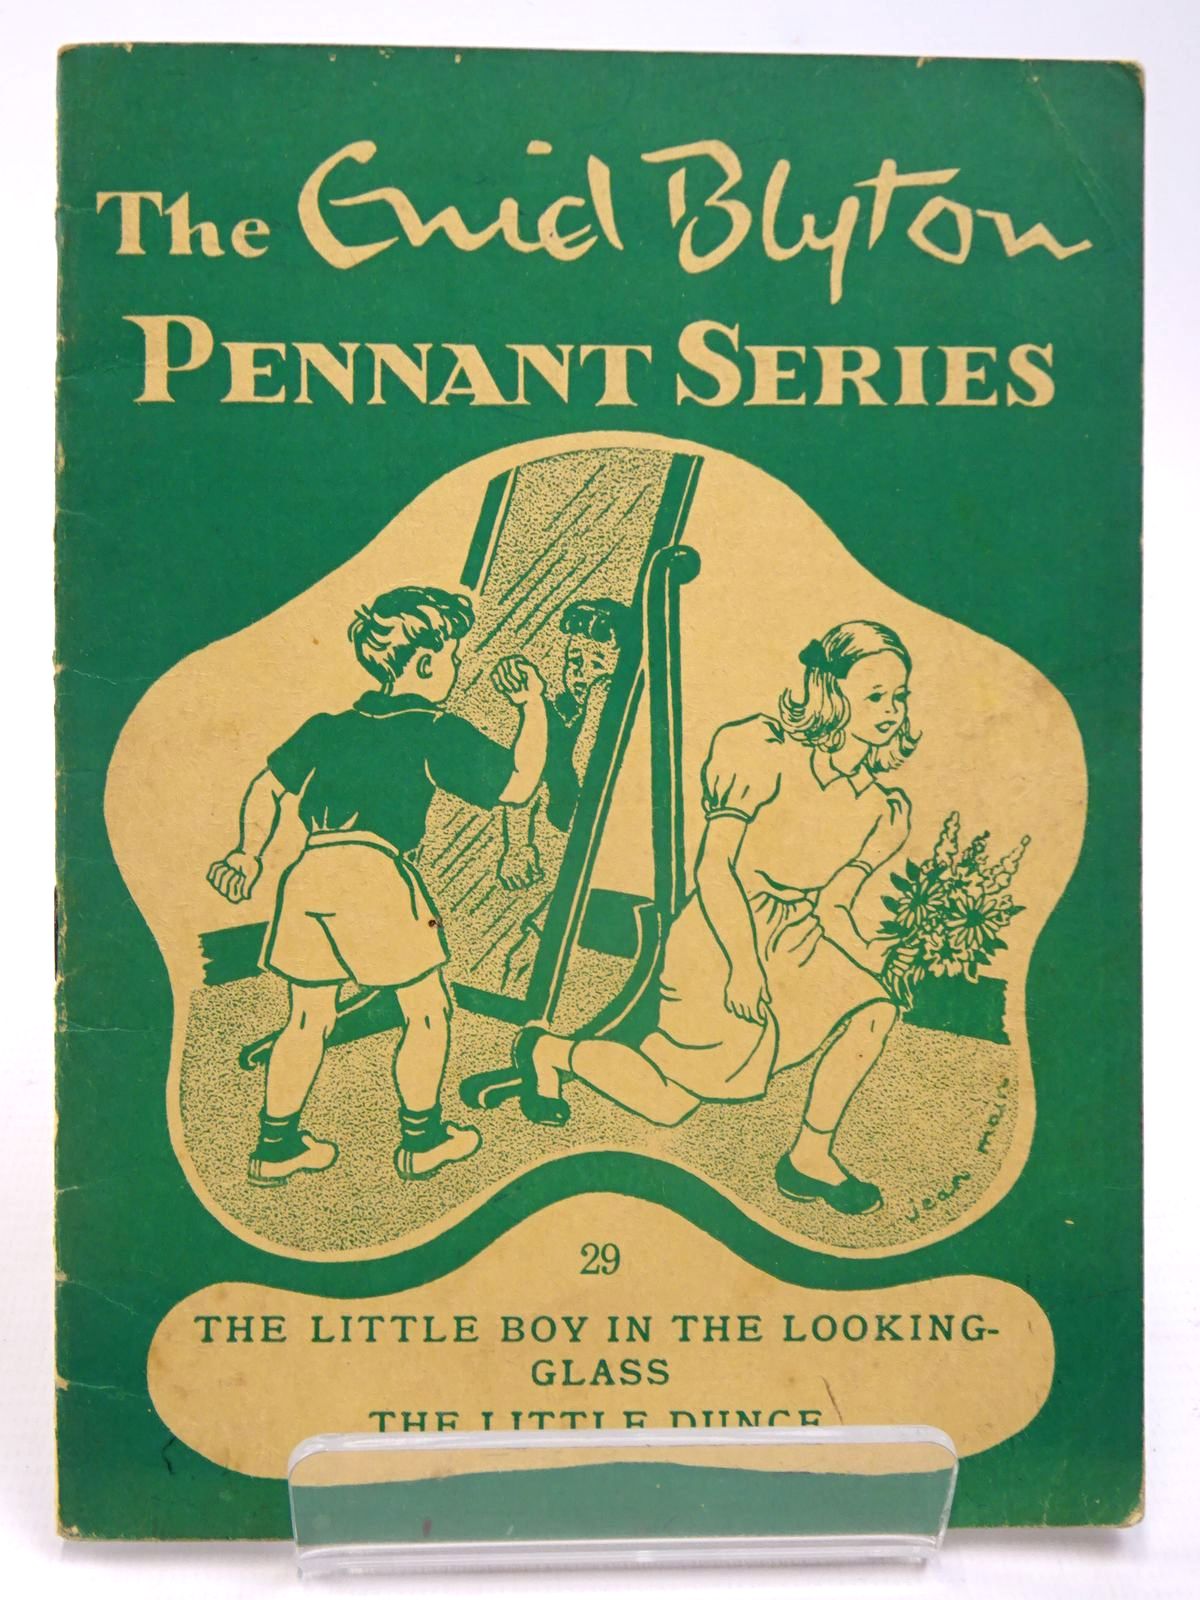 Photo of THE ENID BLYTON PENNANT SERIES No. 29 THE LITTLE BOY IN THE LOOKING-GLASS / THE LITTLE DUNCE written by Blyton, Enid illustrated by Soper, Eileen Main, Jean published by Macmillan &amp; Co. Ltd. (STOCK CODE: 2130512)  for sale by Stella & Rose's Books